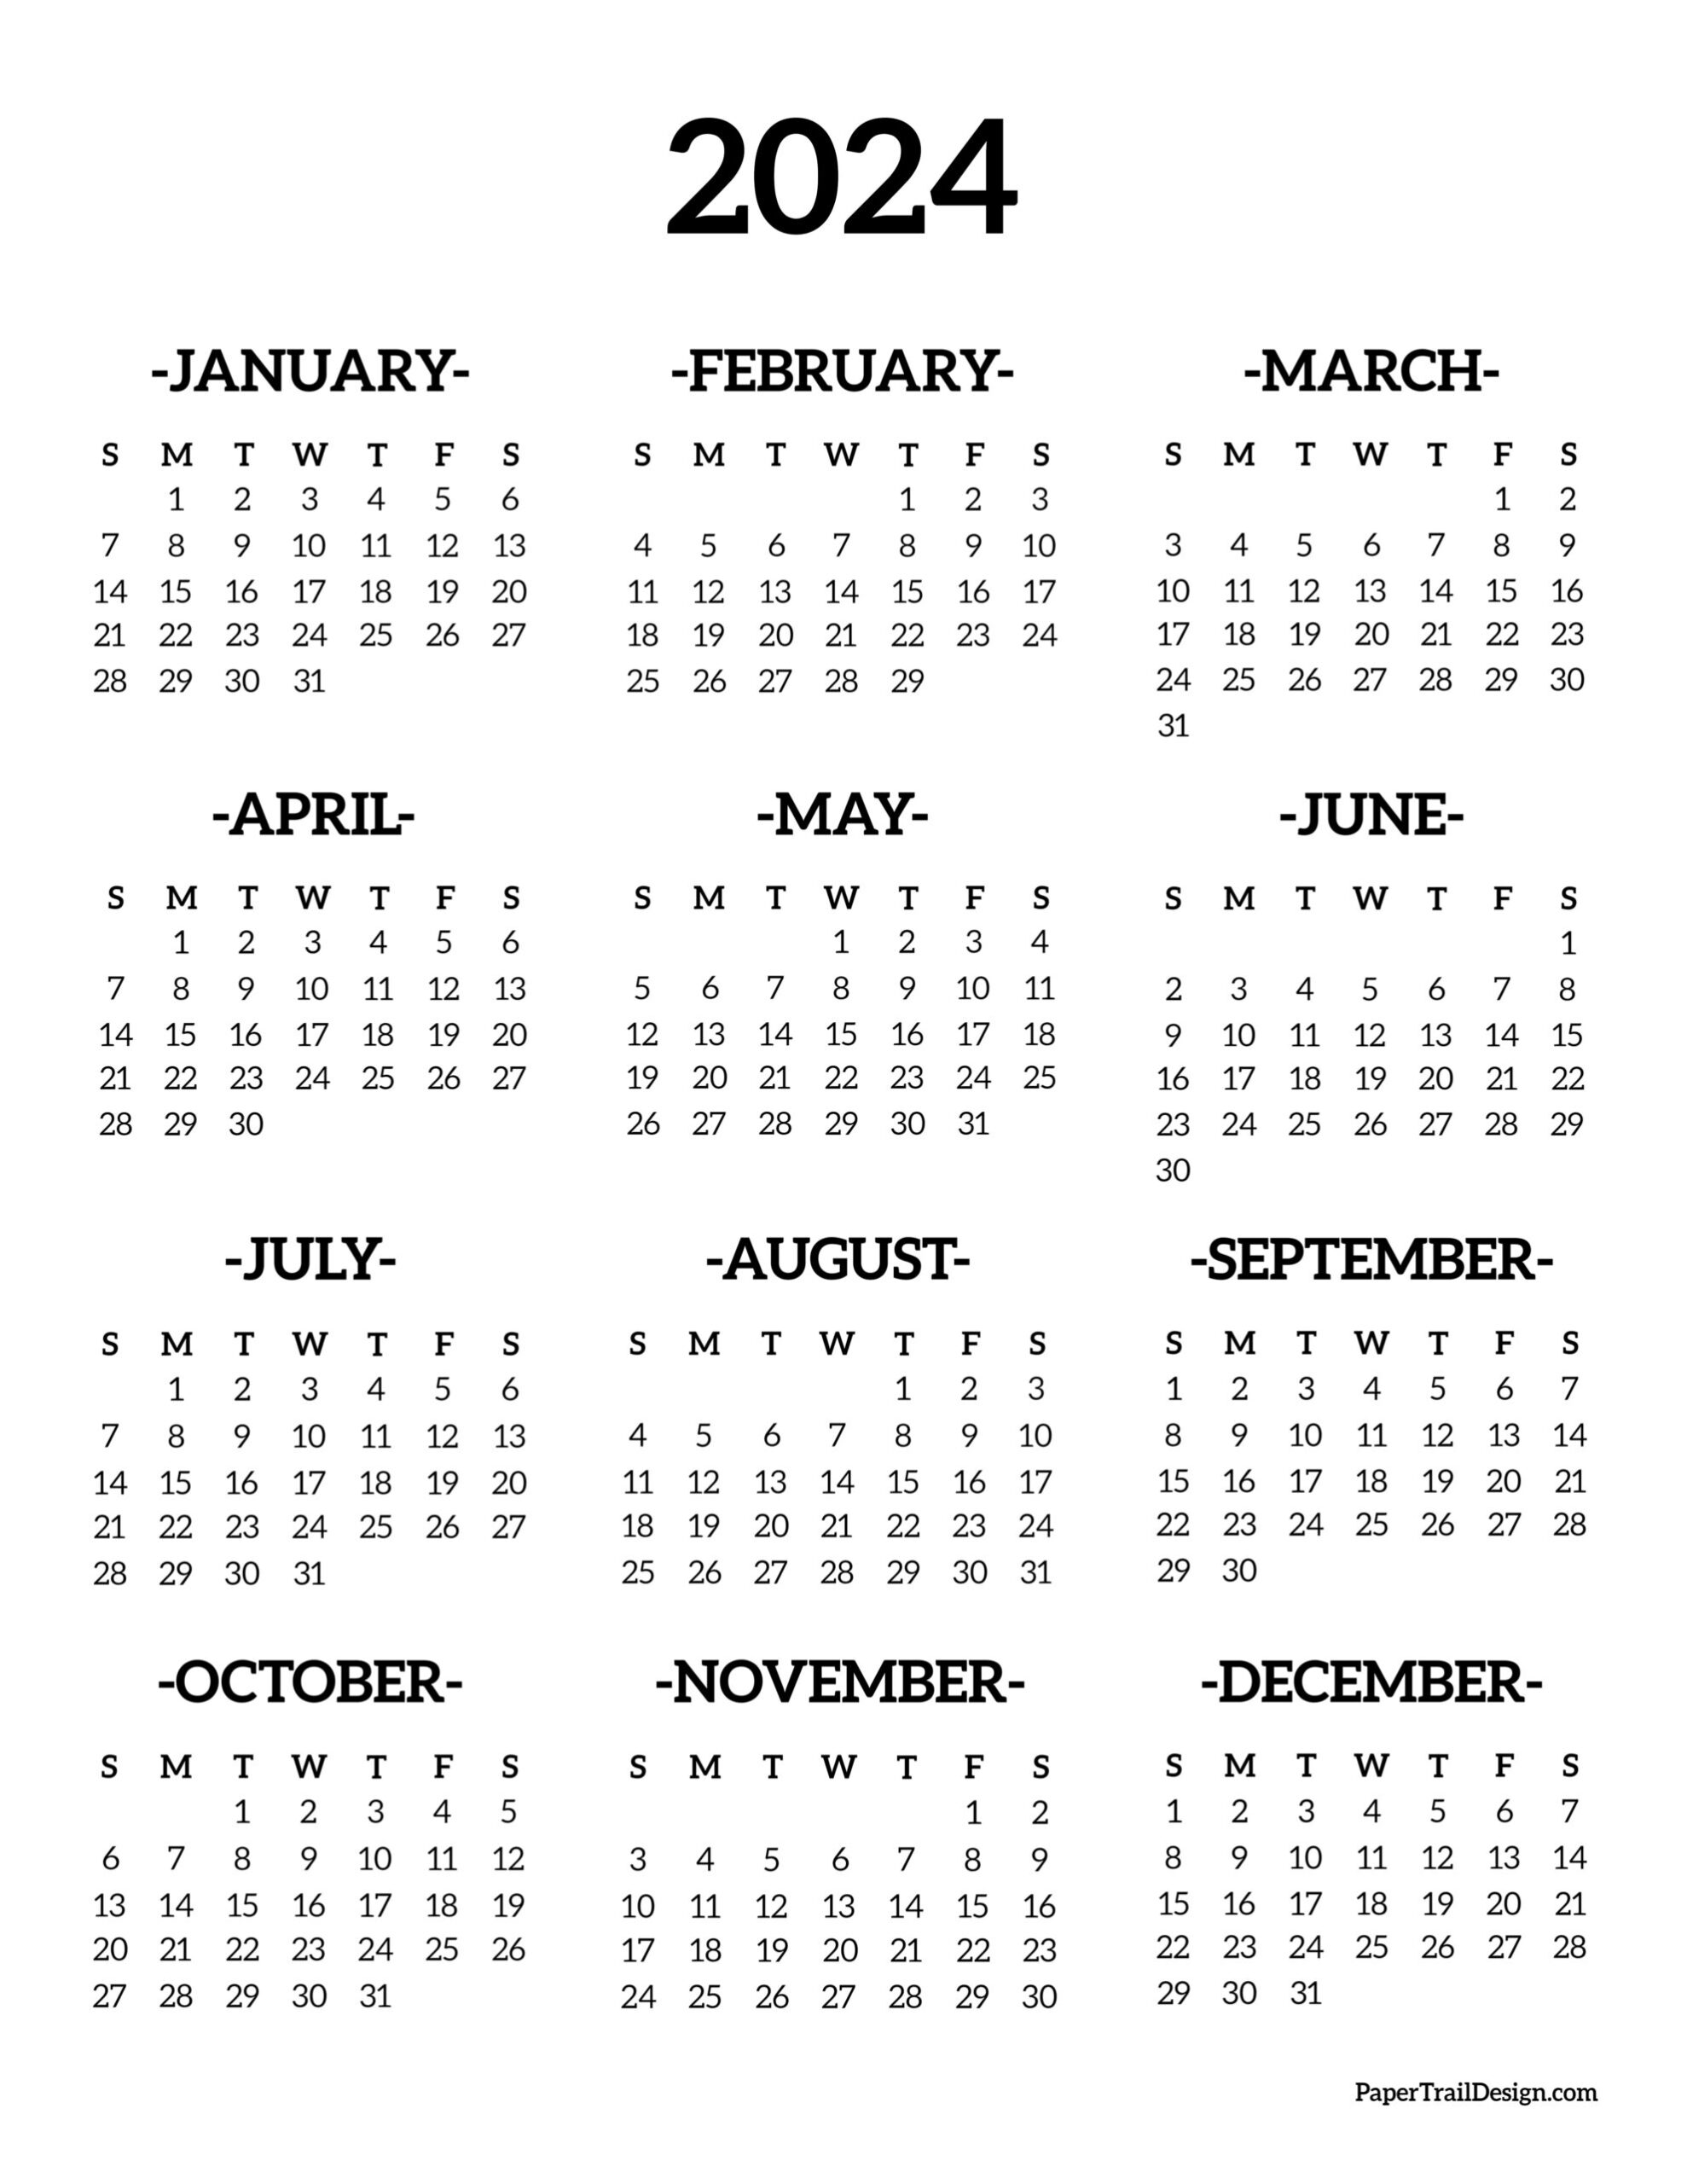 Calendar 2024 Printable One Page - Paper Trail Design for Printable Year At A Glance Calendar 2024